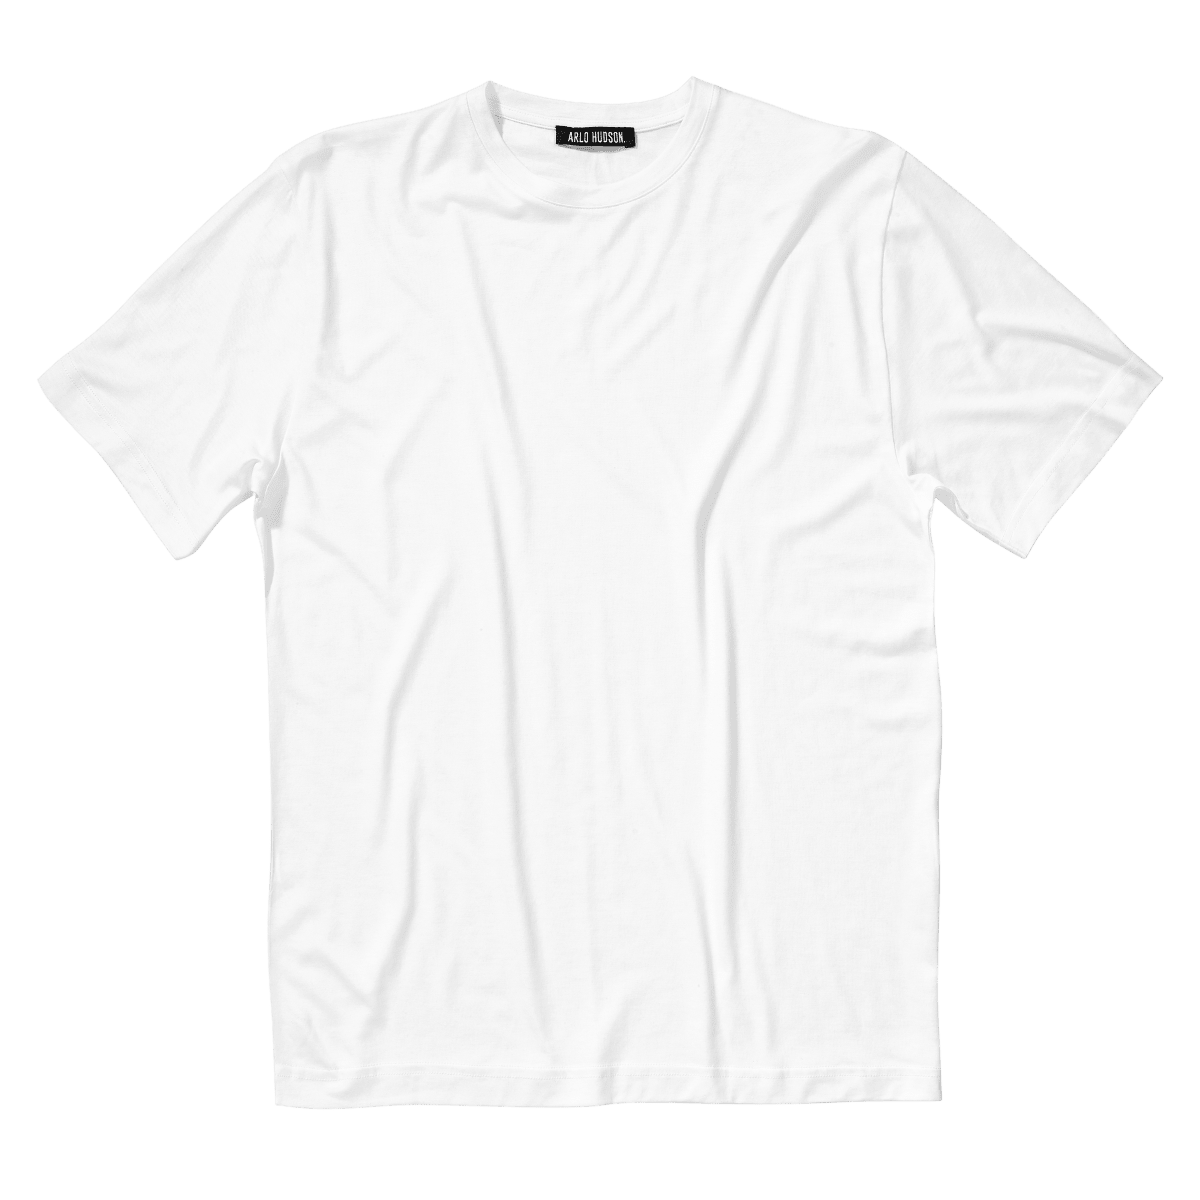 The Essential T-Shirt